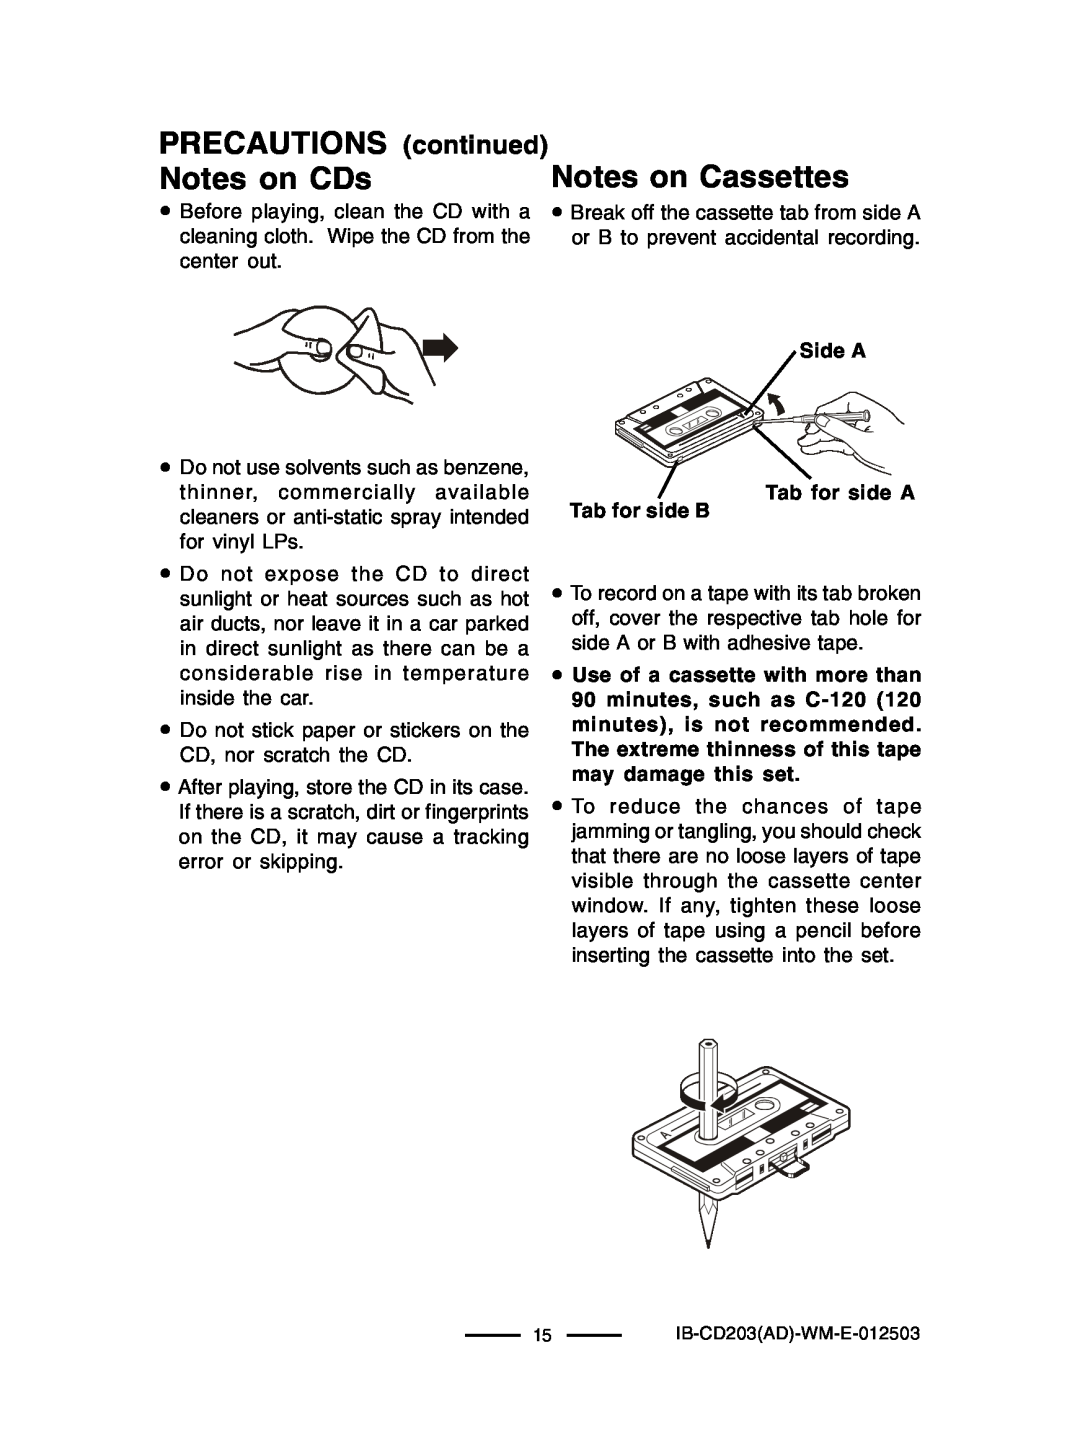 Lenoxx Electronics CD203 manual PRECAUTIONS continued Notes on CDs, Notes on Cassettes 